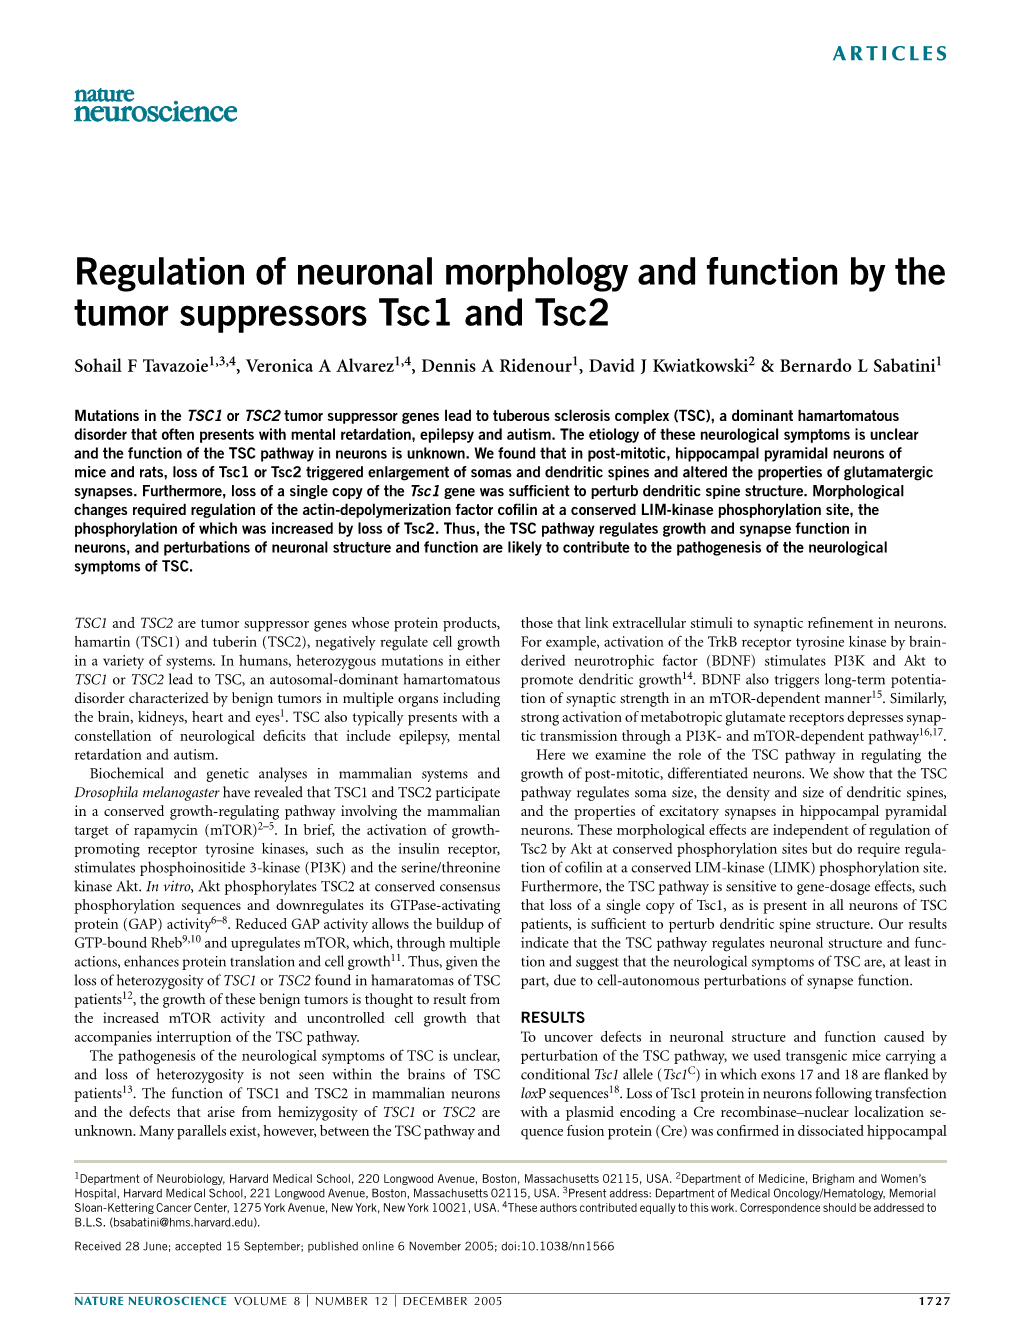 Regulation of Neuronal Morphology and Function by the Tumor Suppressors Tsc1 and Tsc2